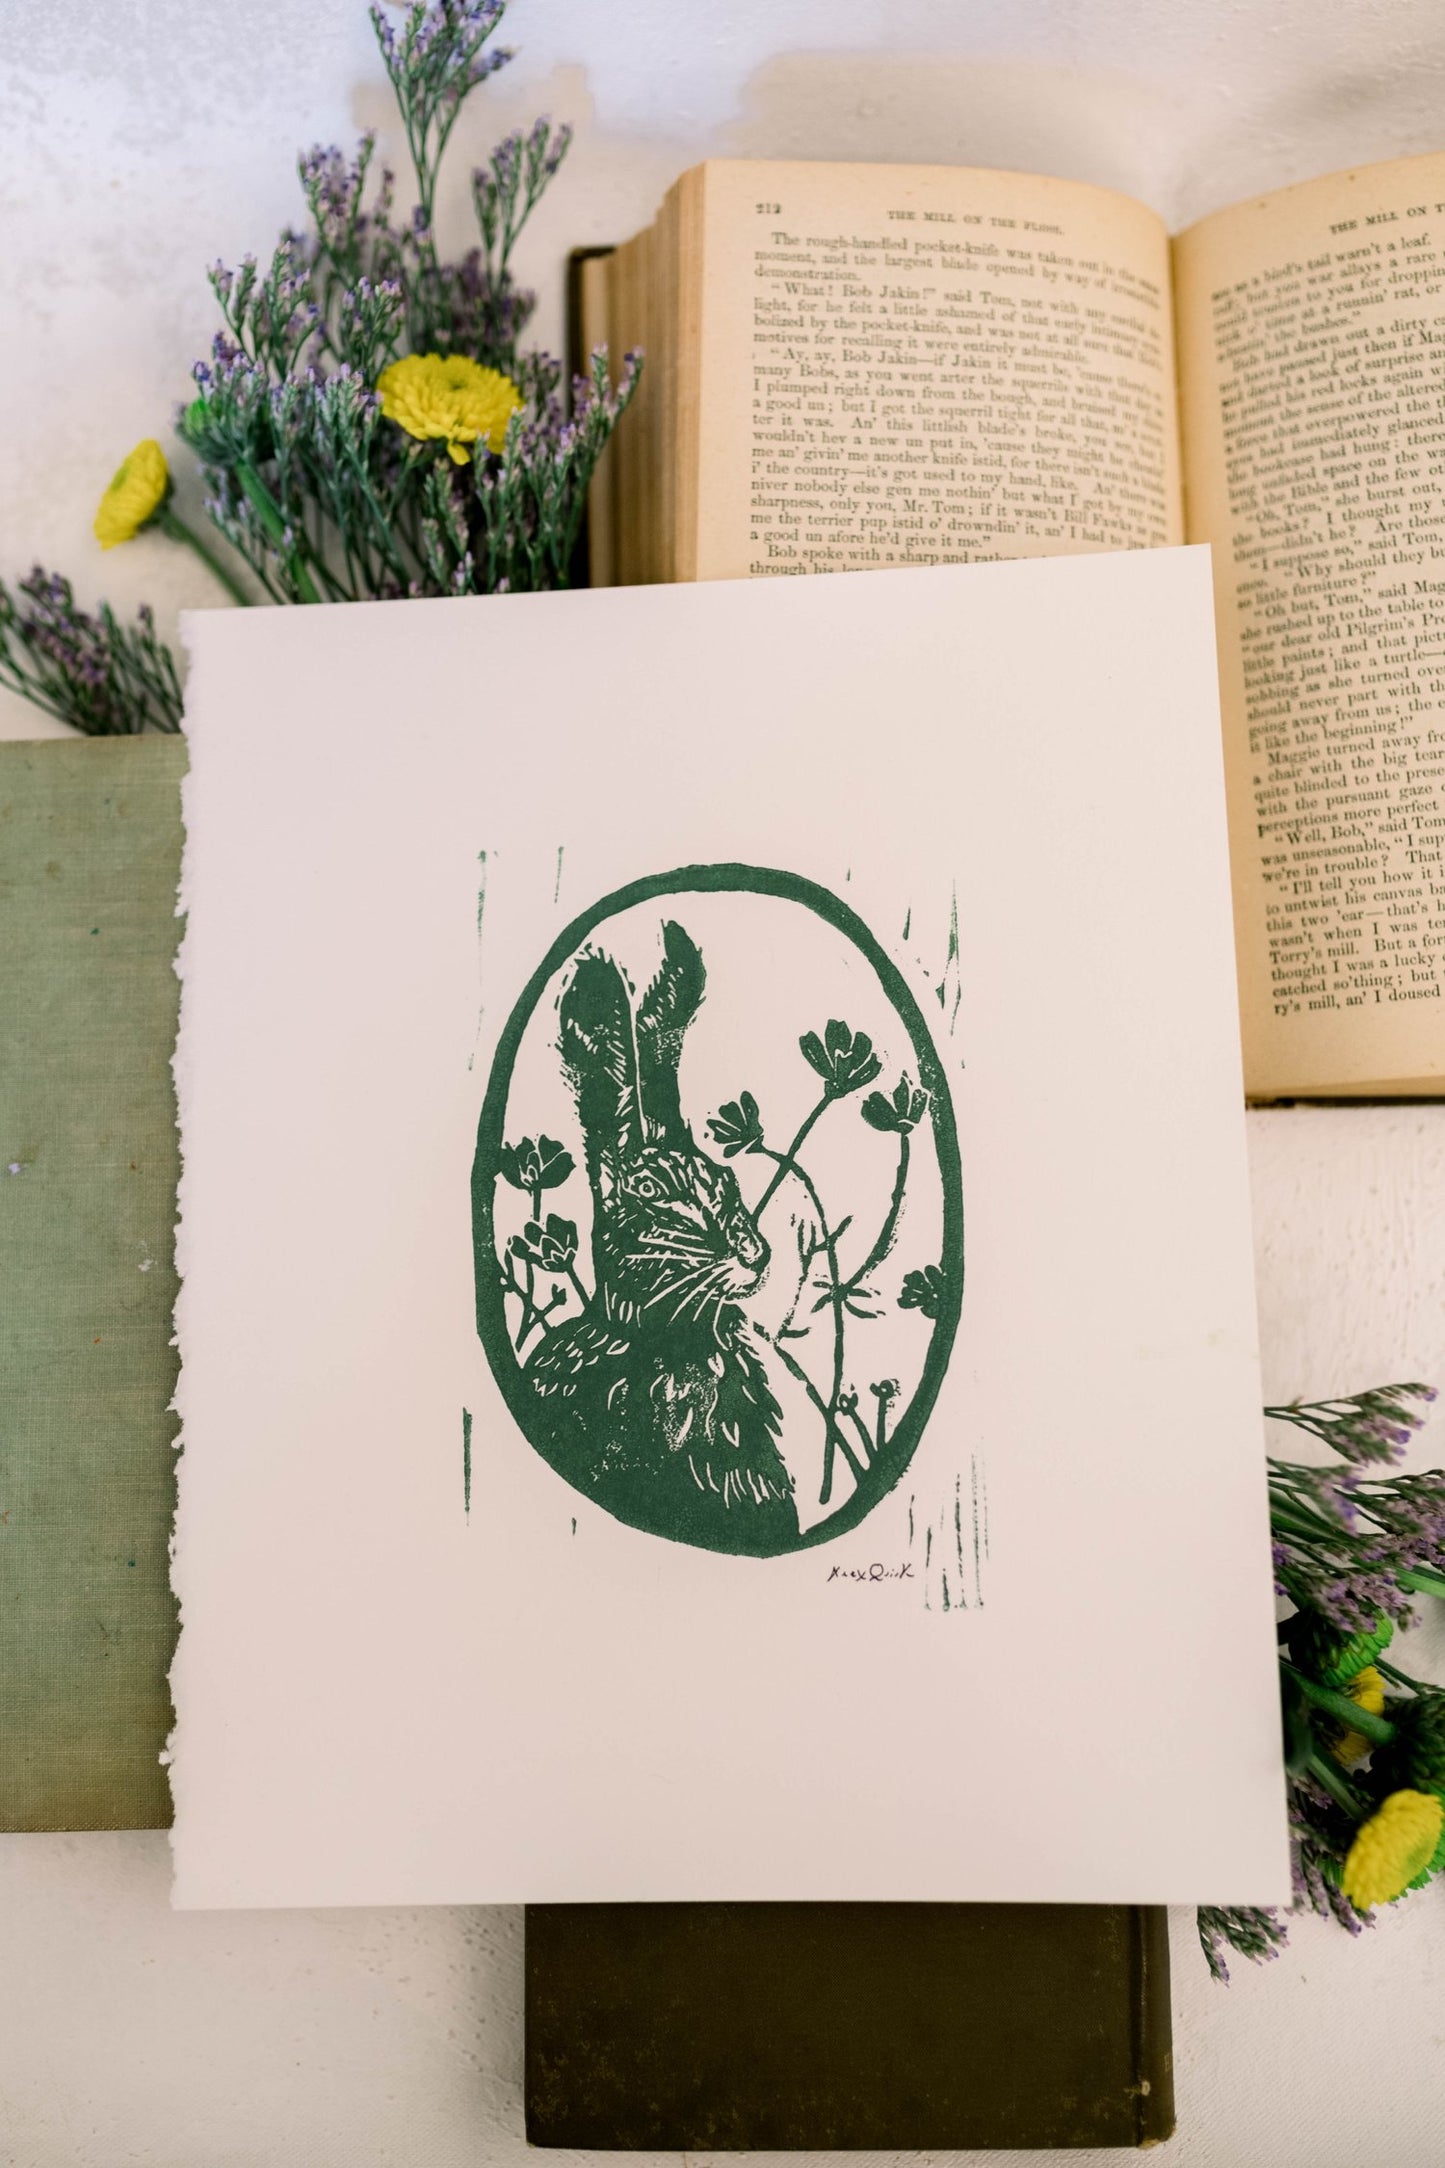 Woodland Prints by Works of a Quirk (8”x10”)